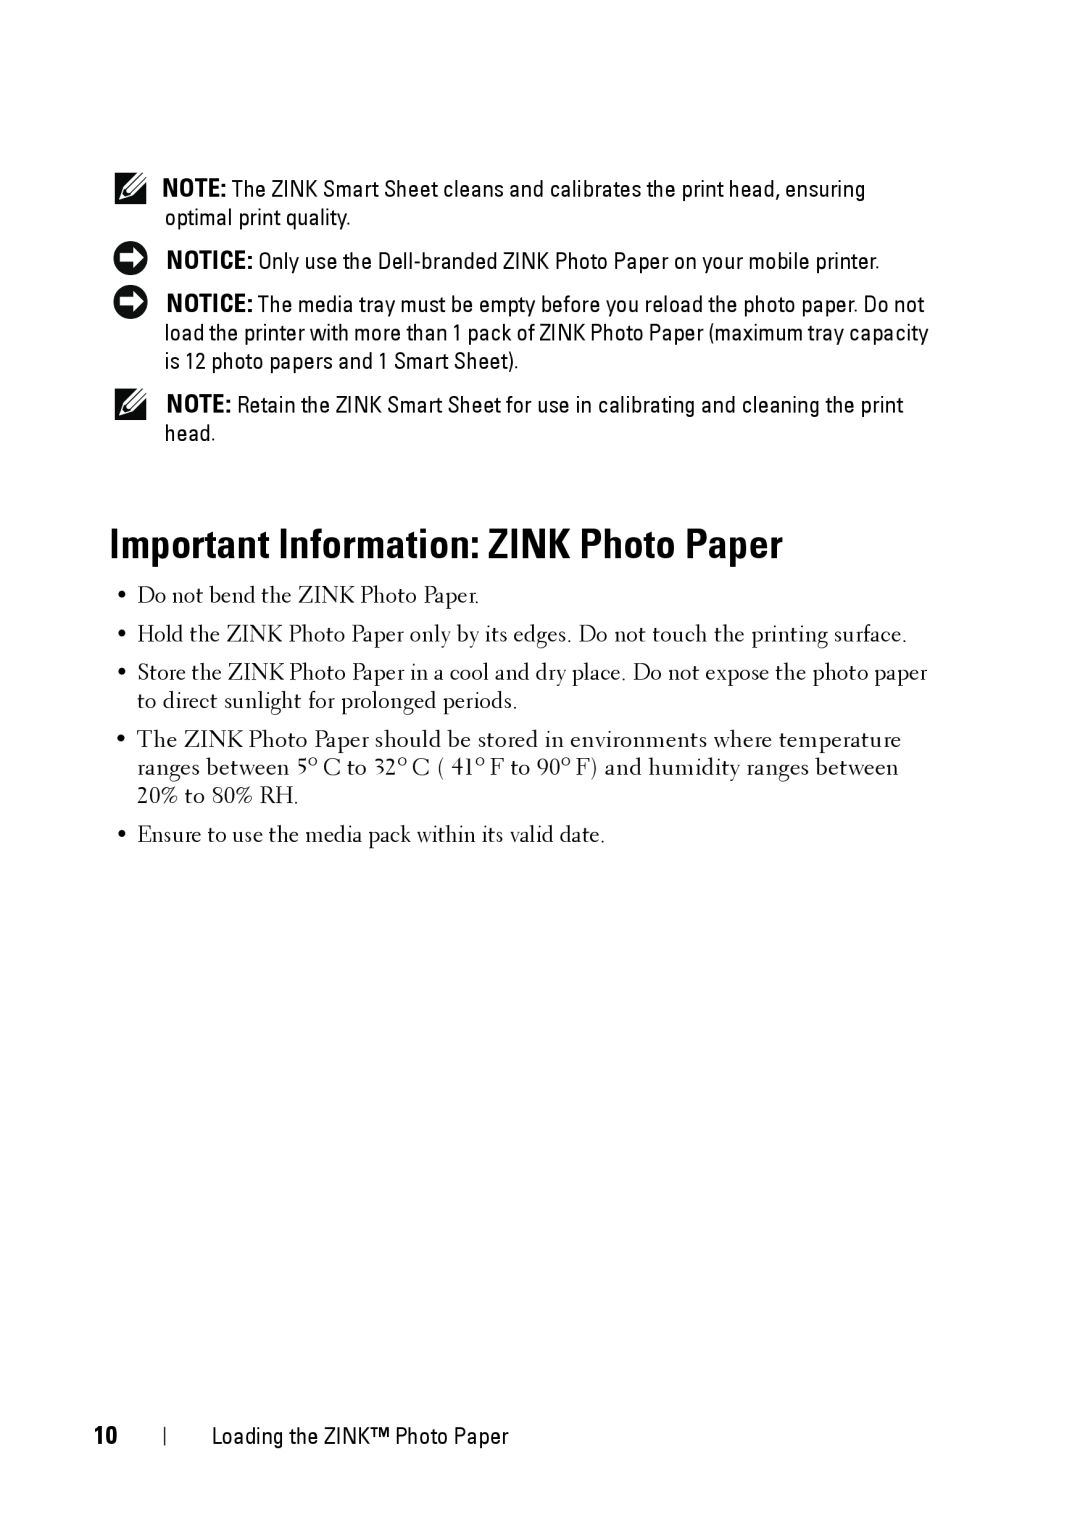 Dell PZ310 manual Important Information ZINK Photo Paper 